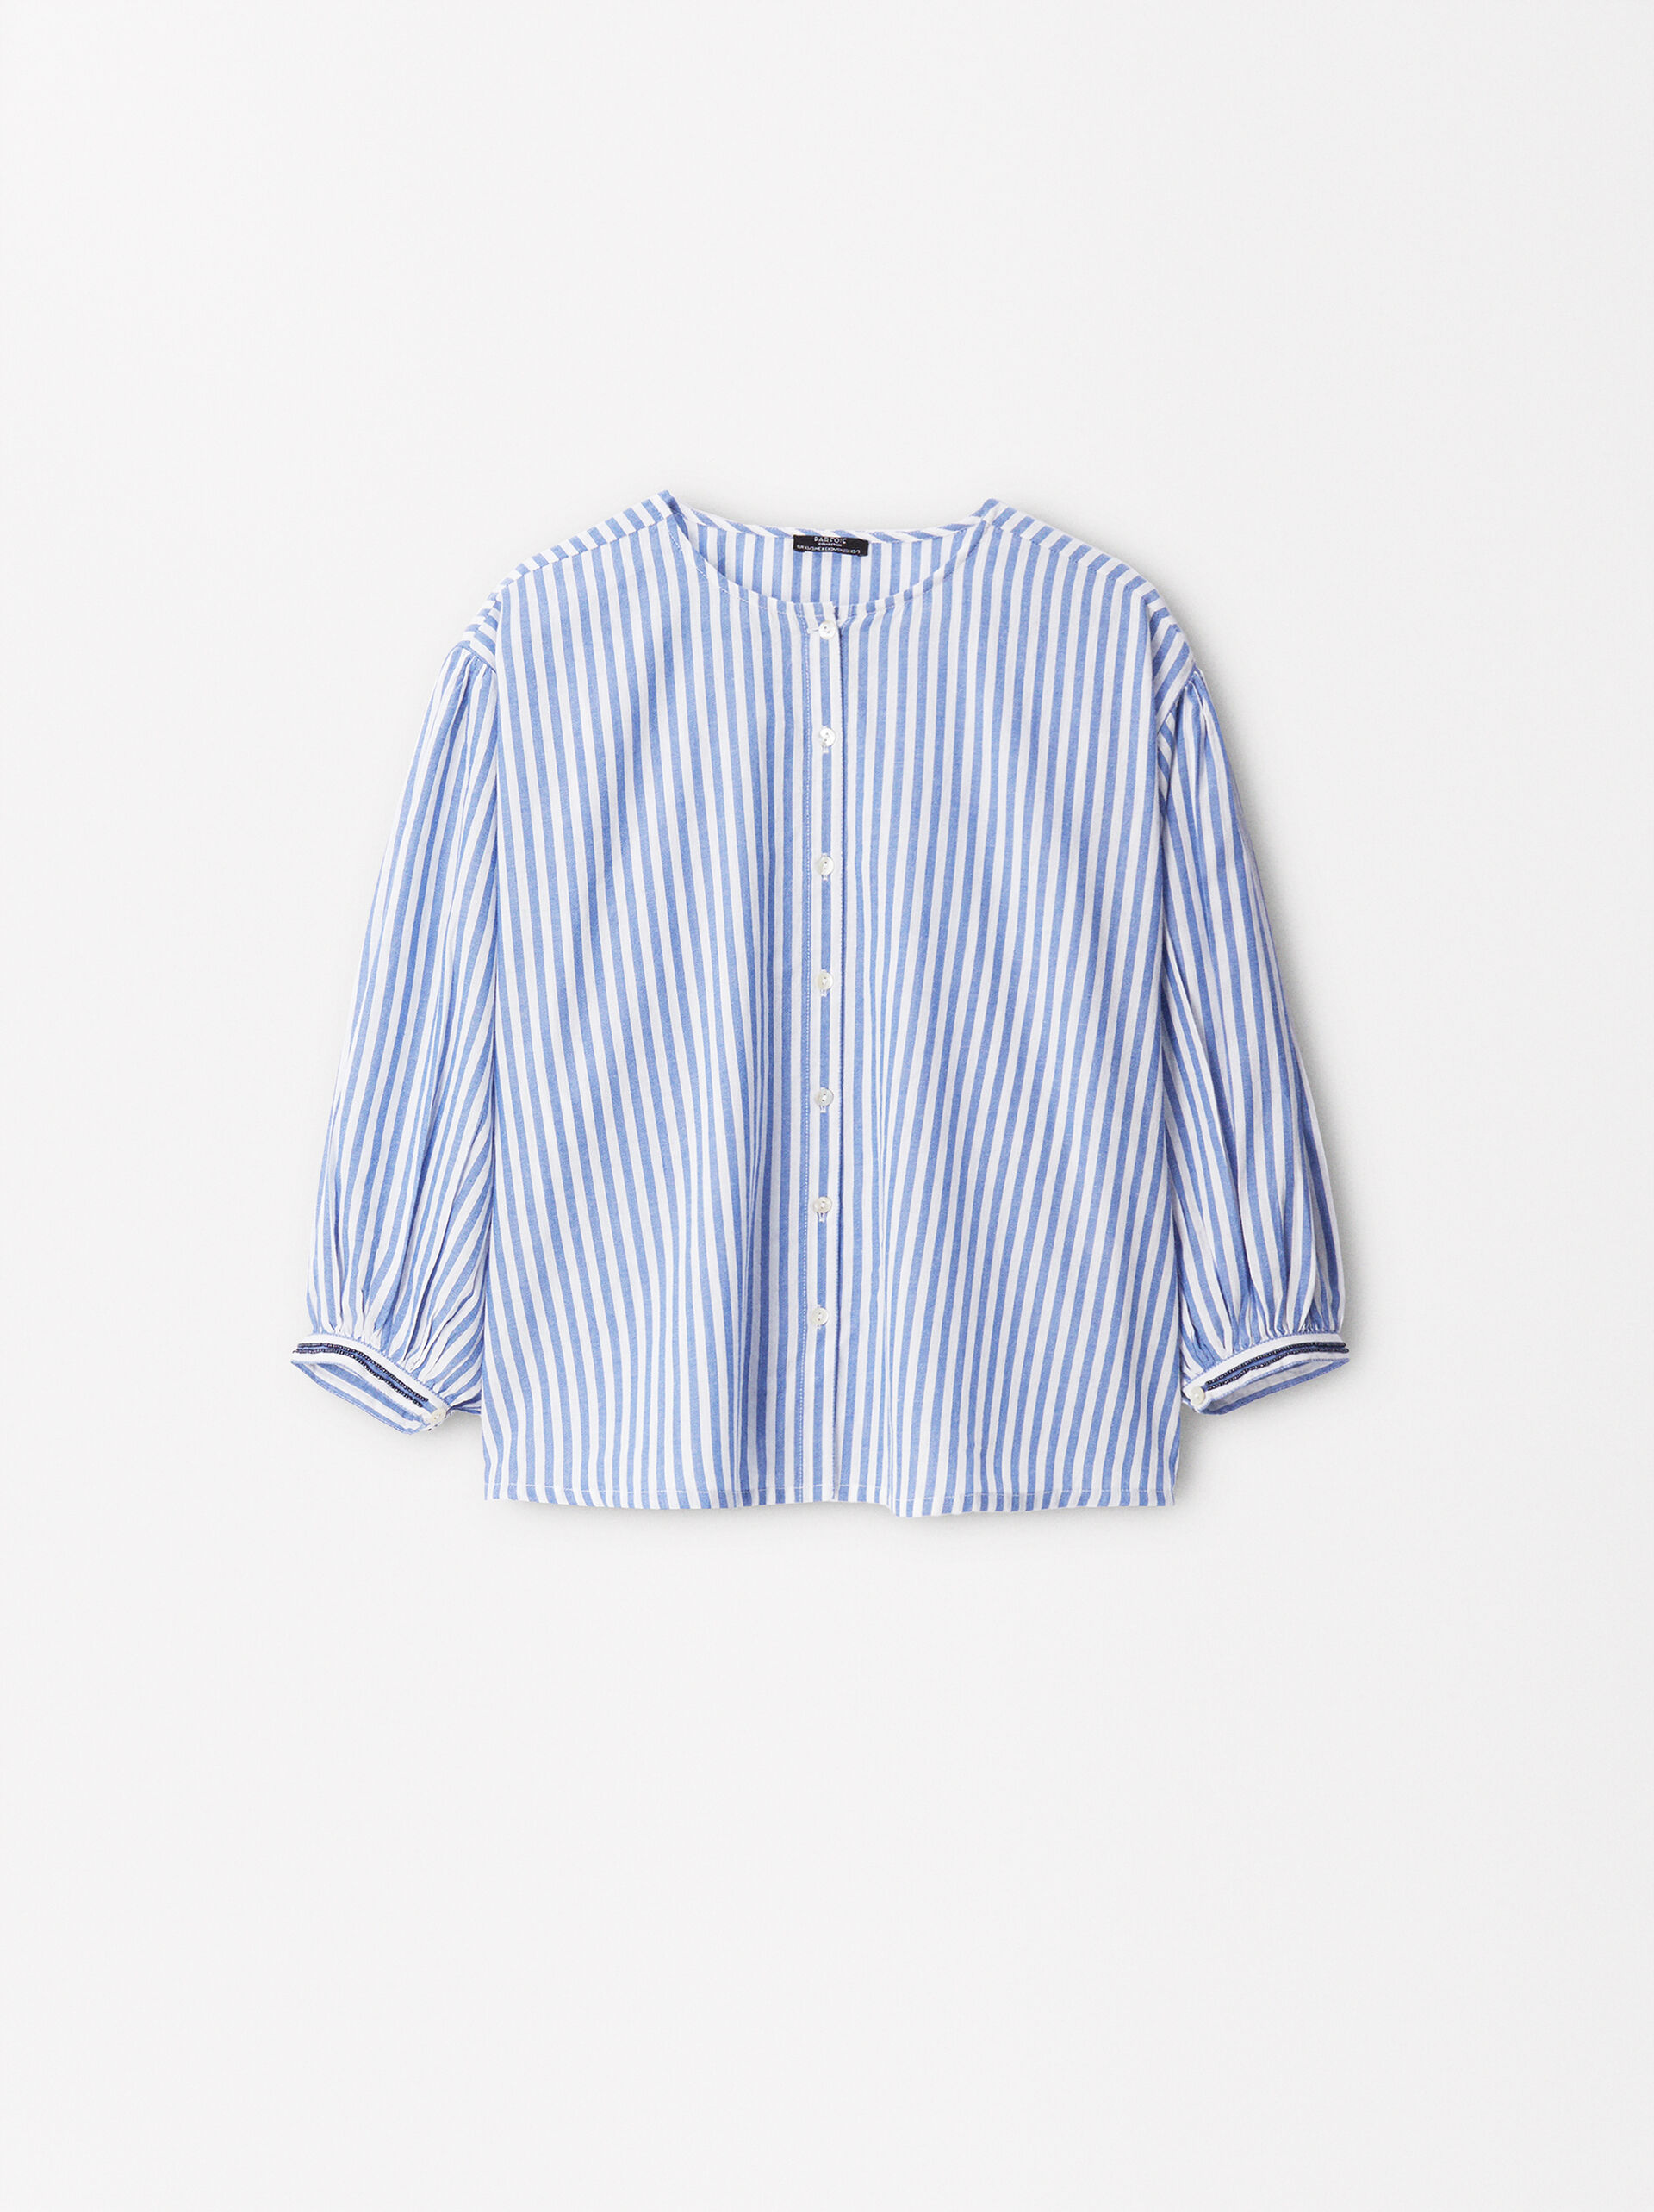 100% Cotton Striped Shirt image number 1.0